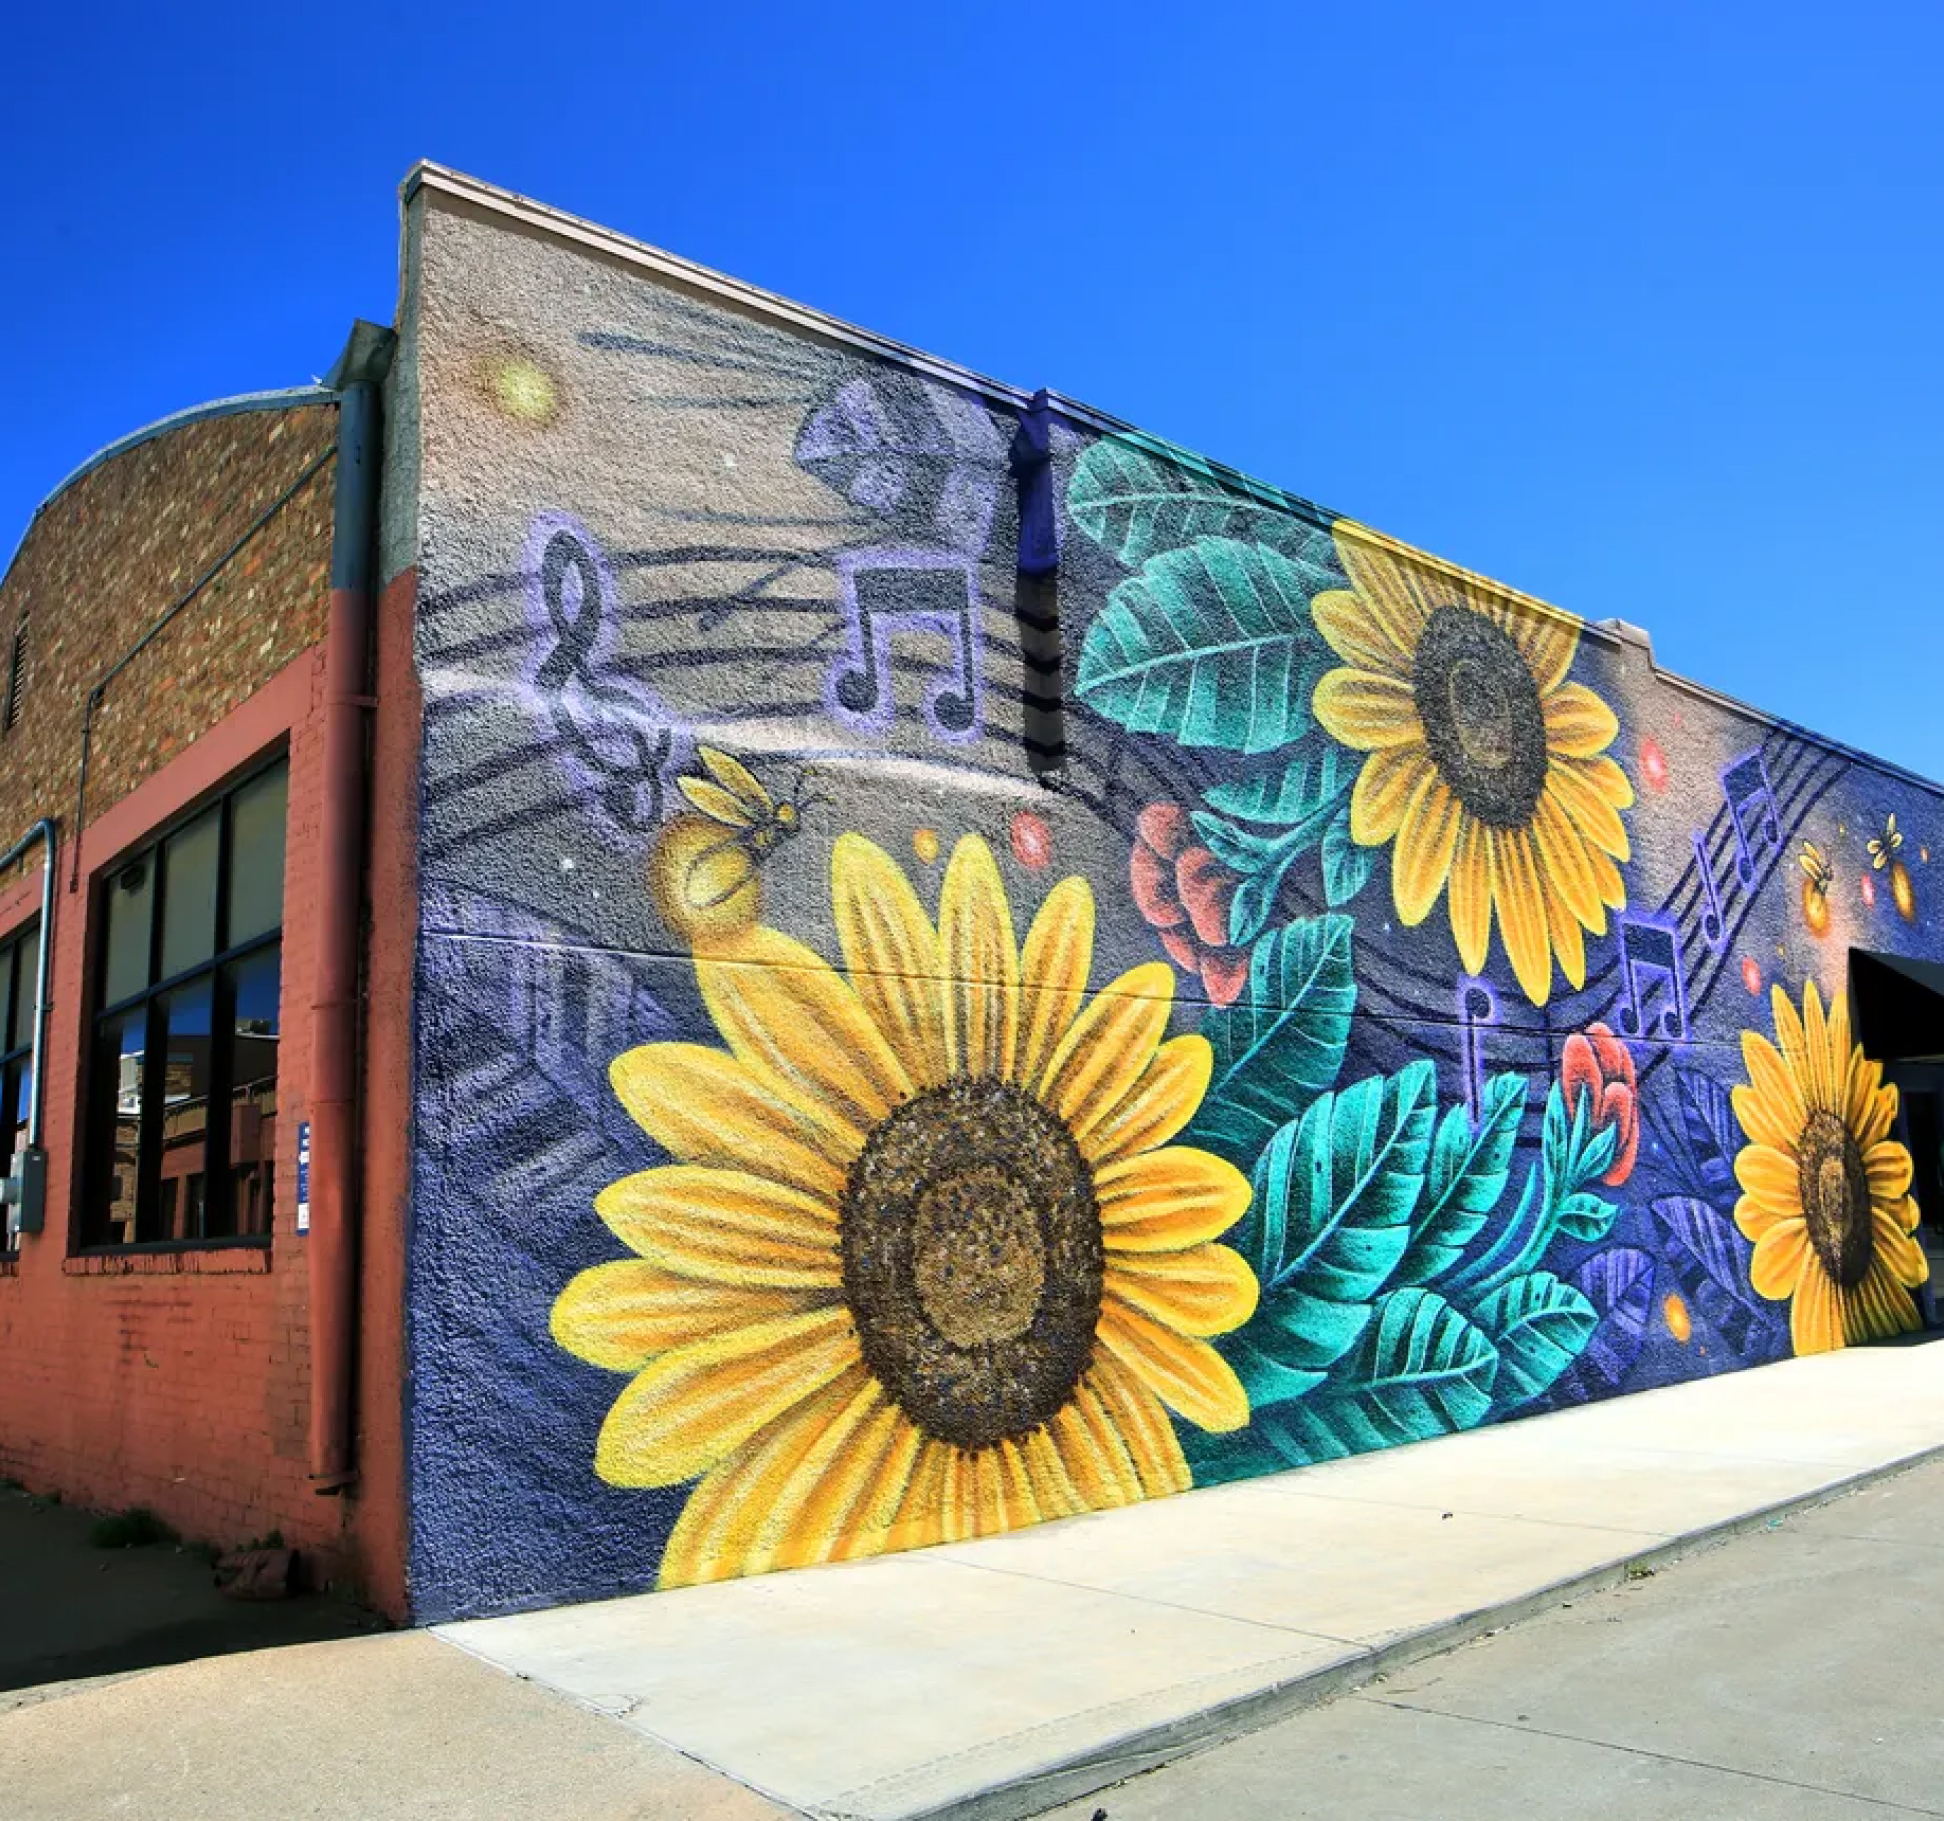 A colorful mural of sunflowers overlaid on a dark blue-violet background with musical notes.